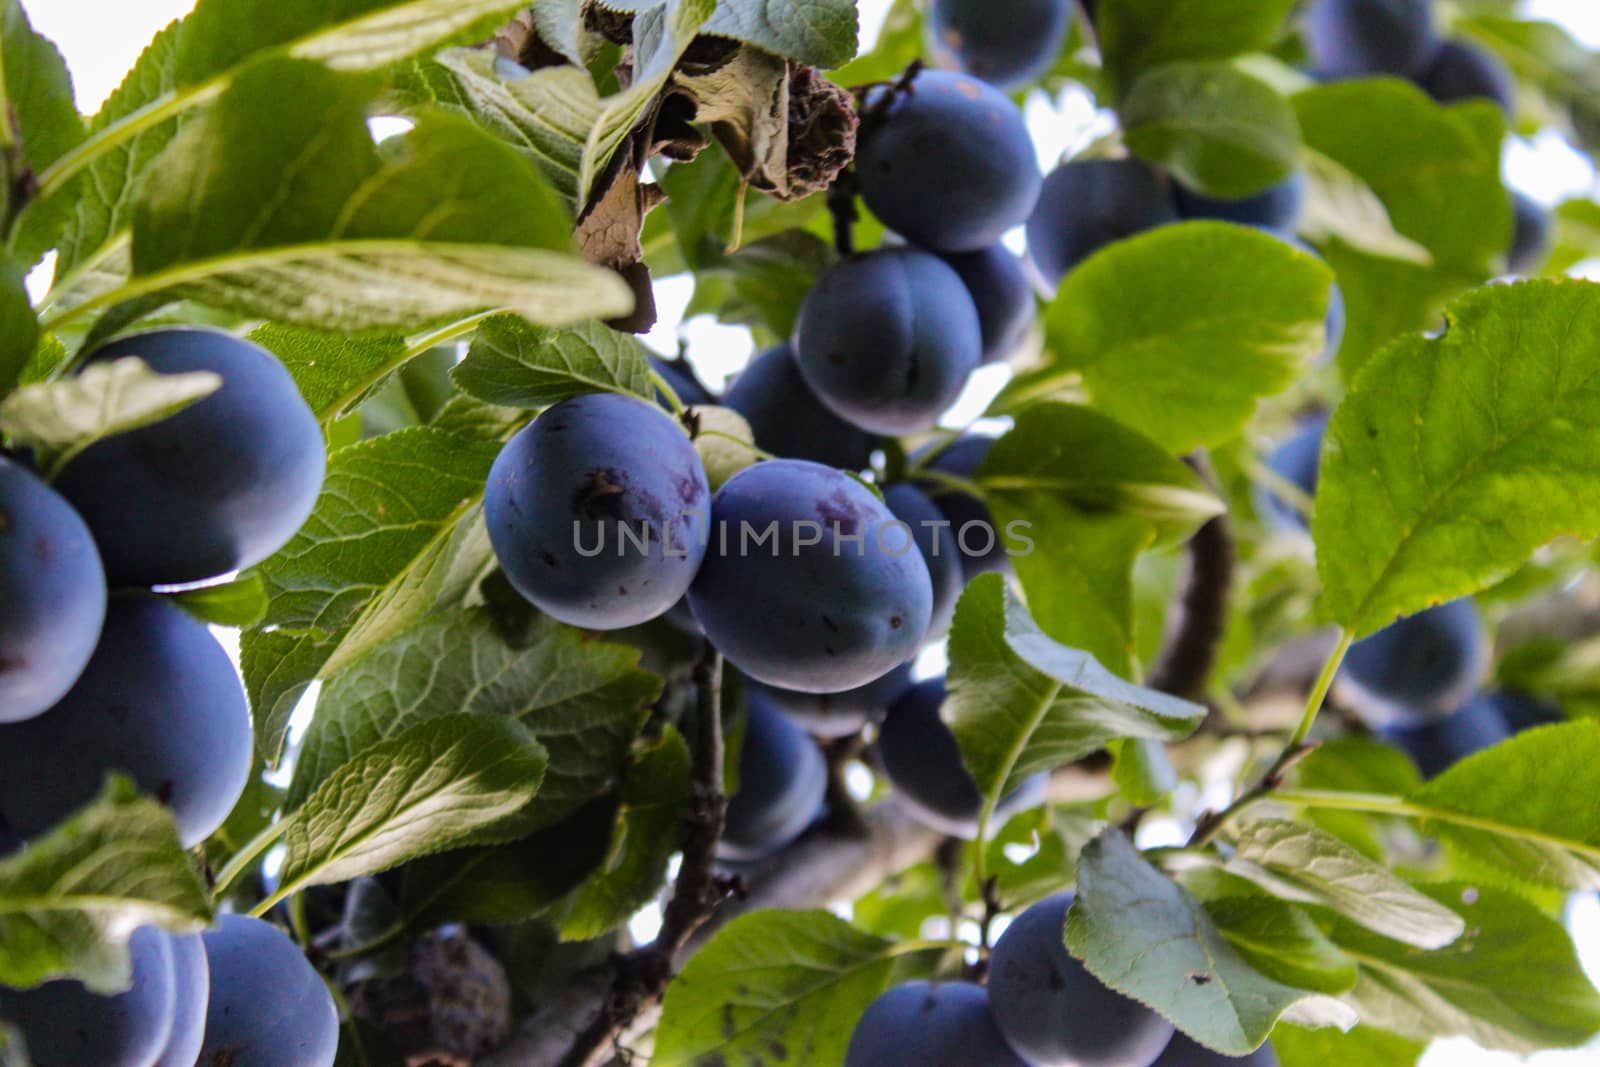 Lots of blue ripe plums among the leaves, photographed under the branch. Zavidovići, Bosnia and Herzegovina.